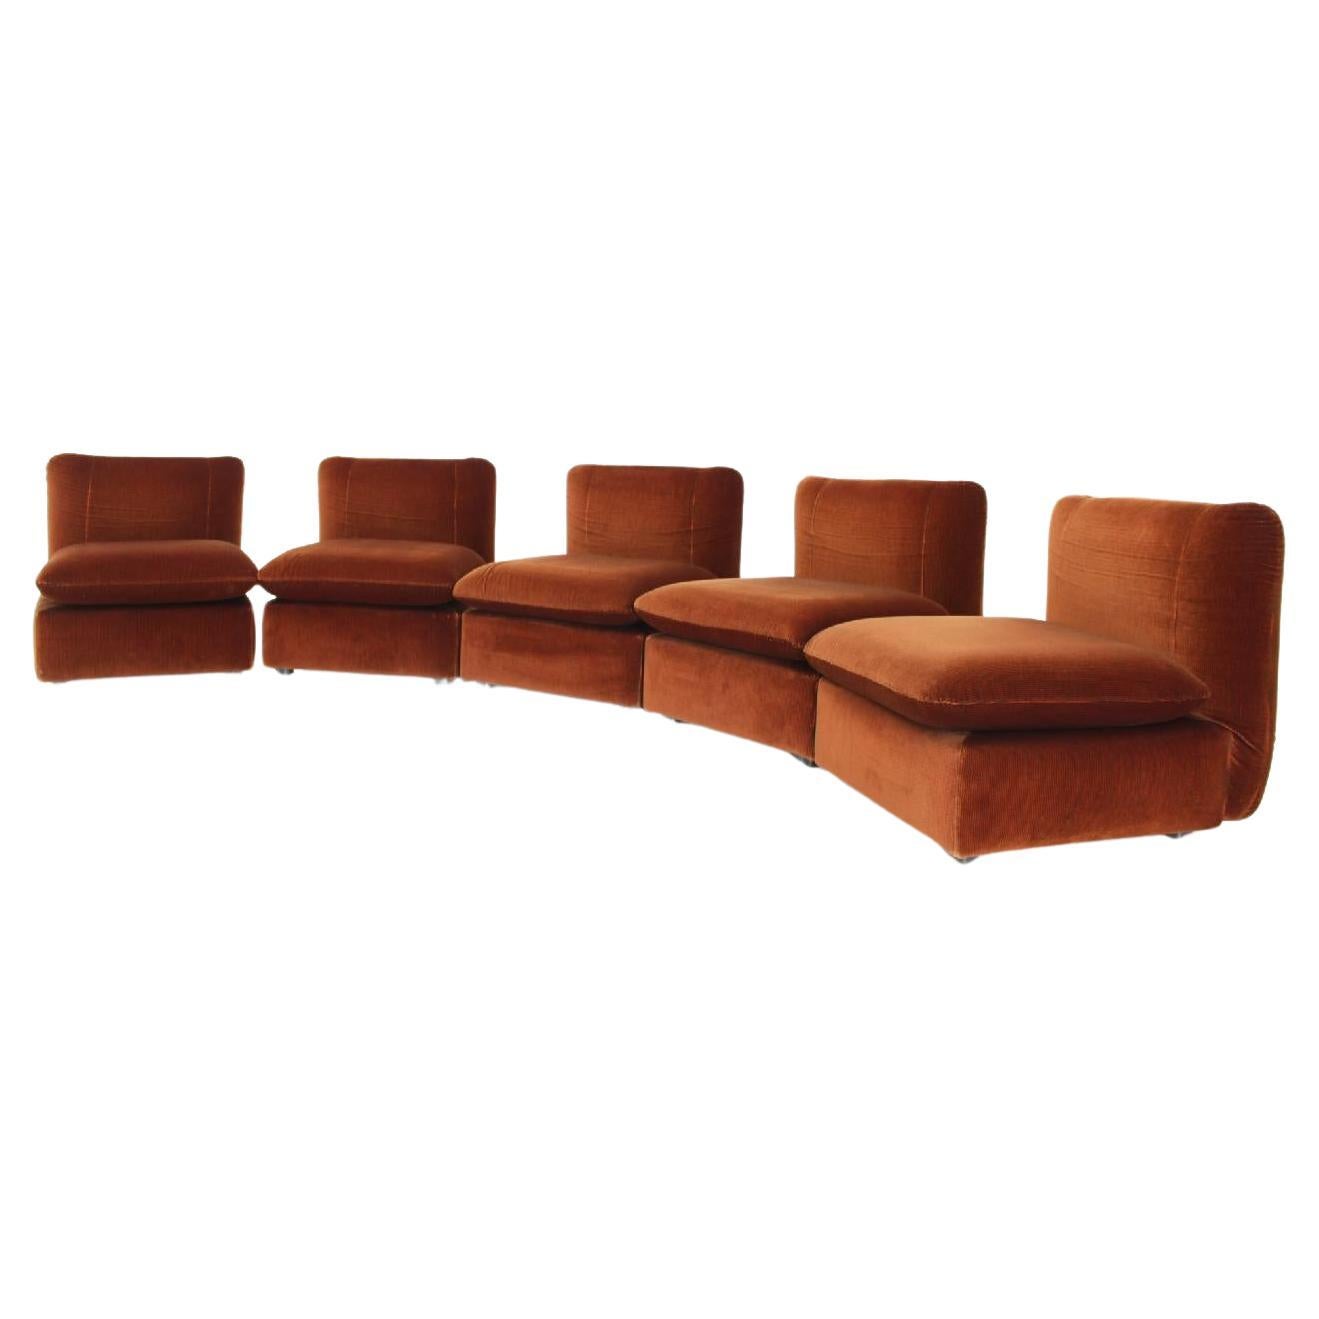 1970s Modular Sofa or Chairs, Italy For Sale